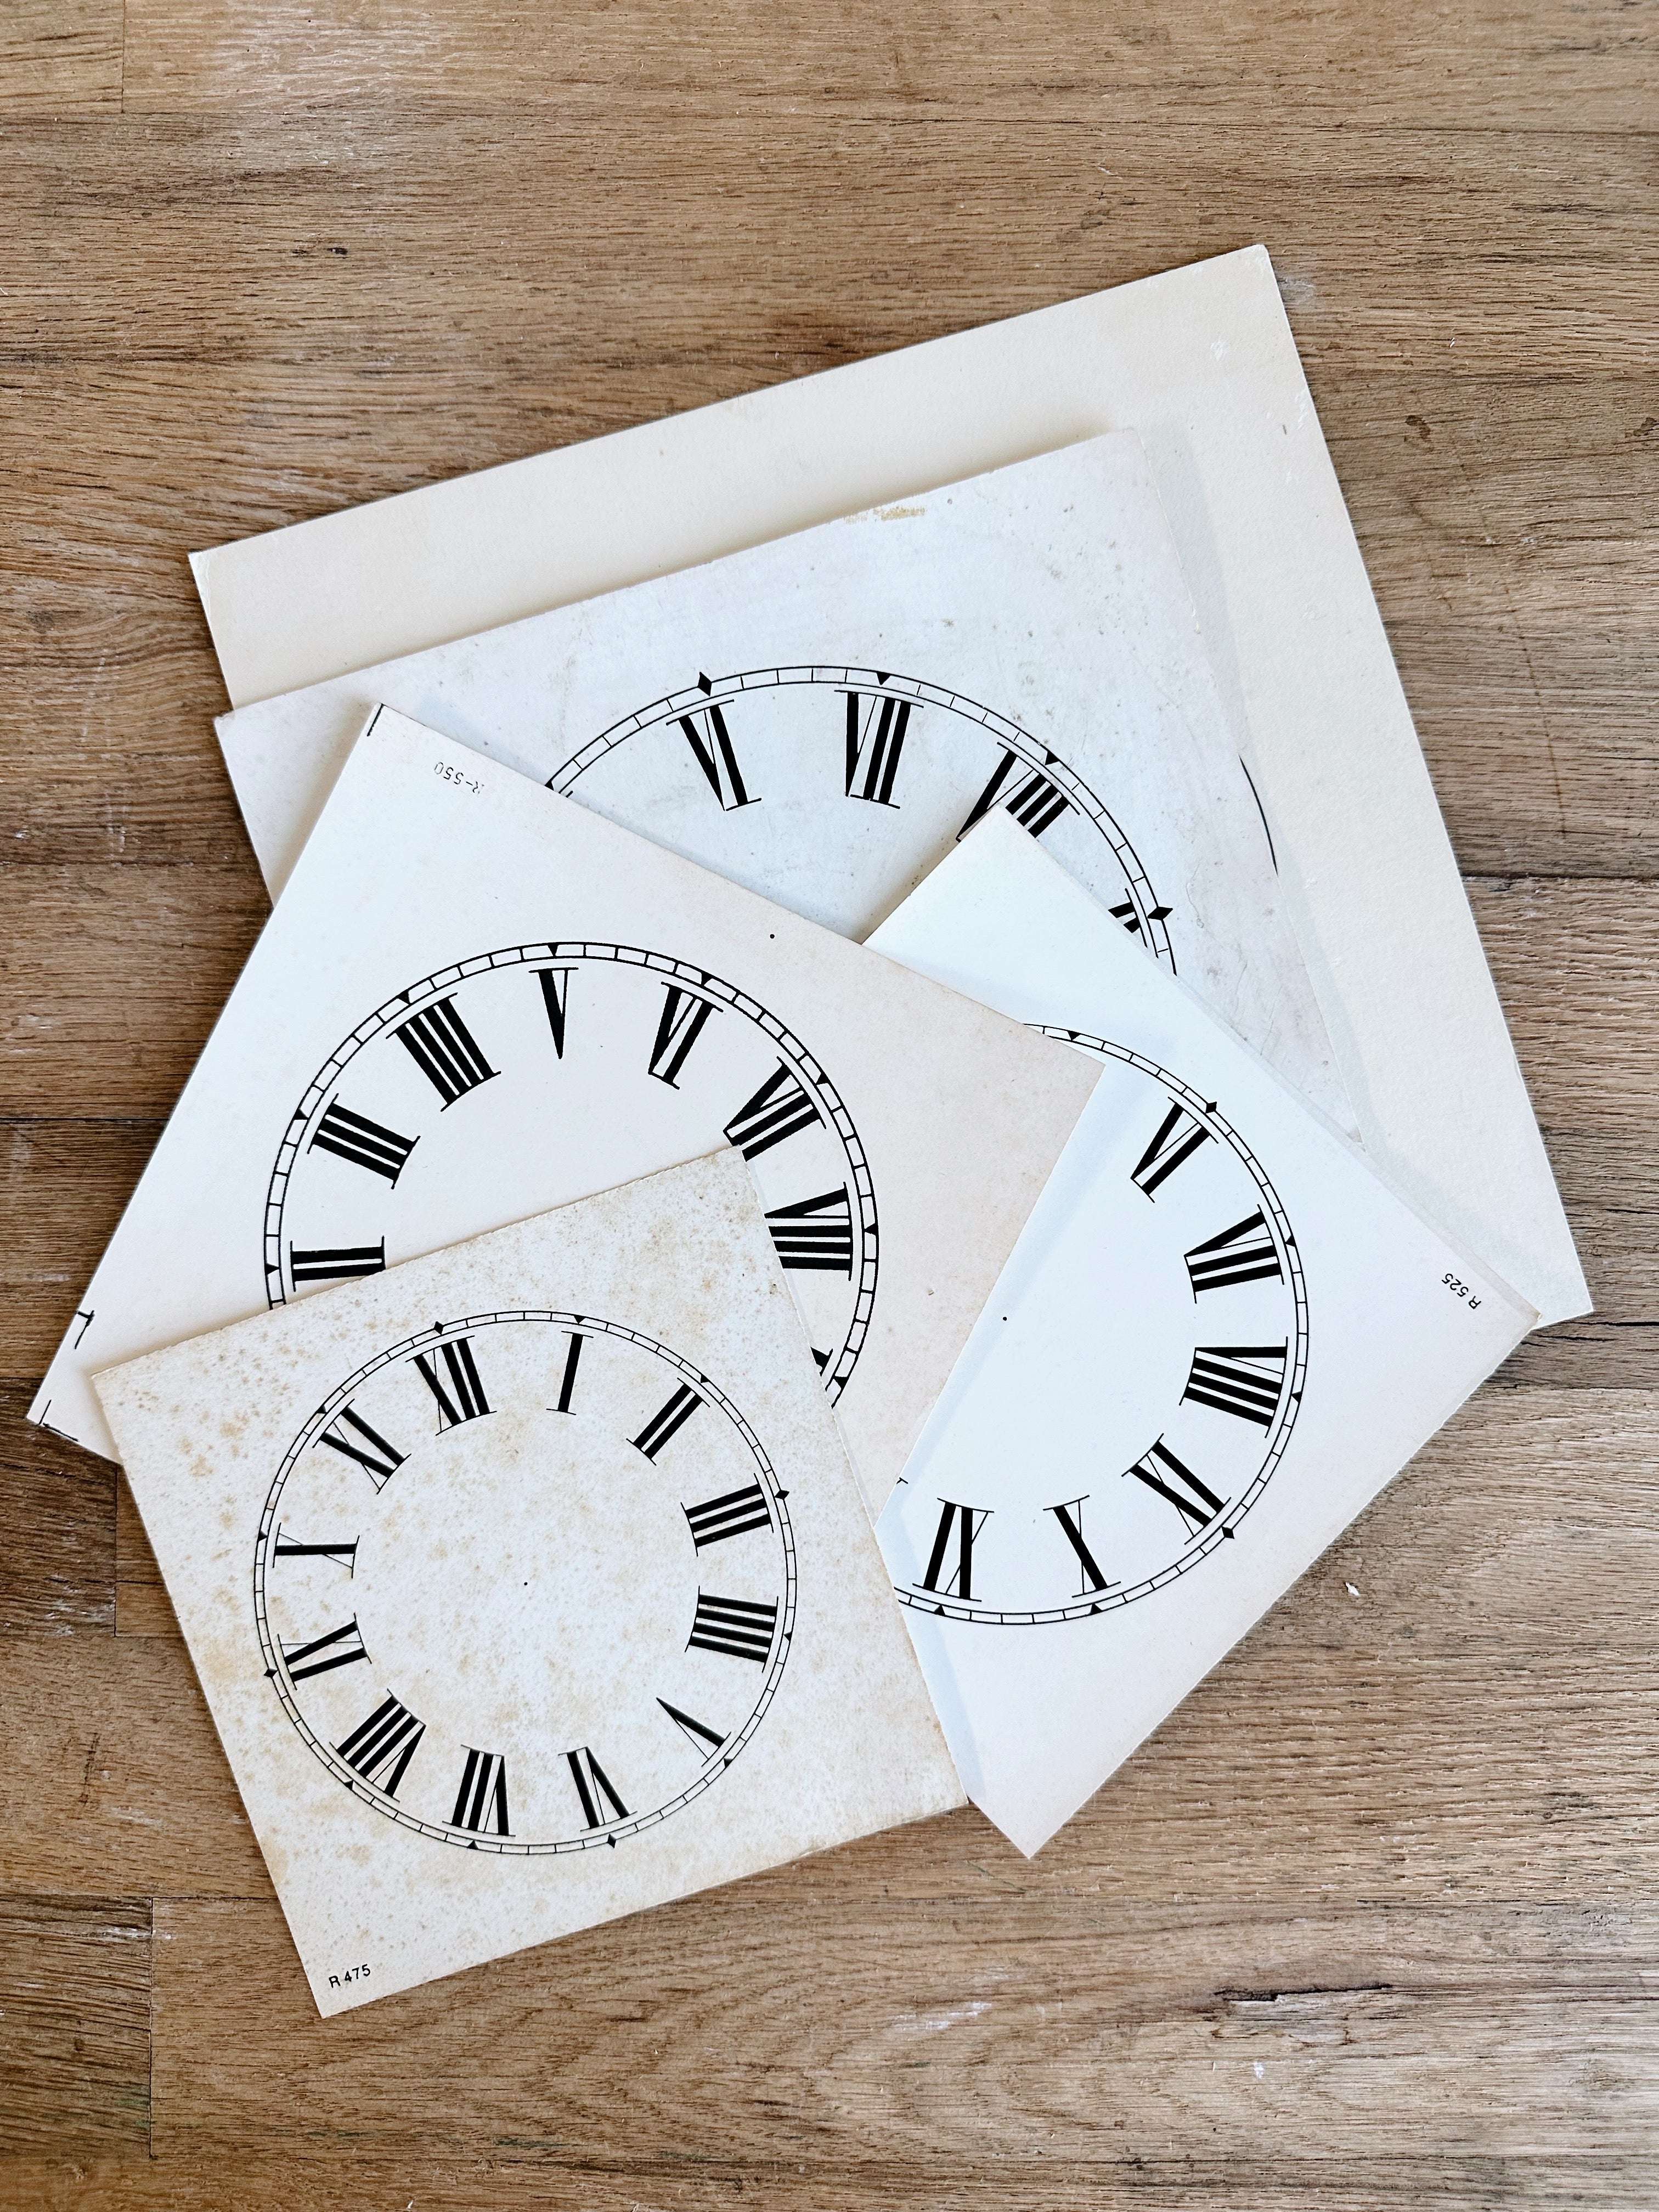 Collection of Five Vintage Paper Clock Faces